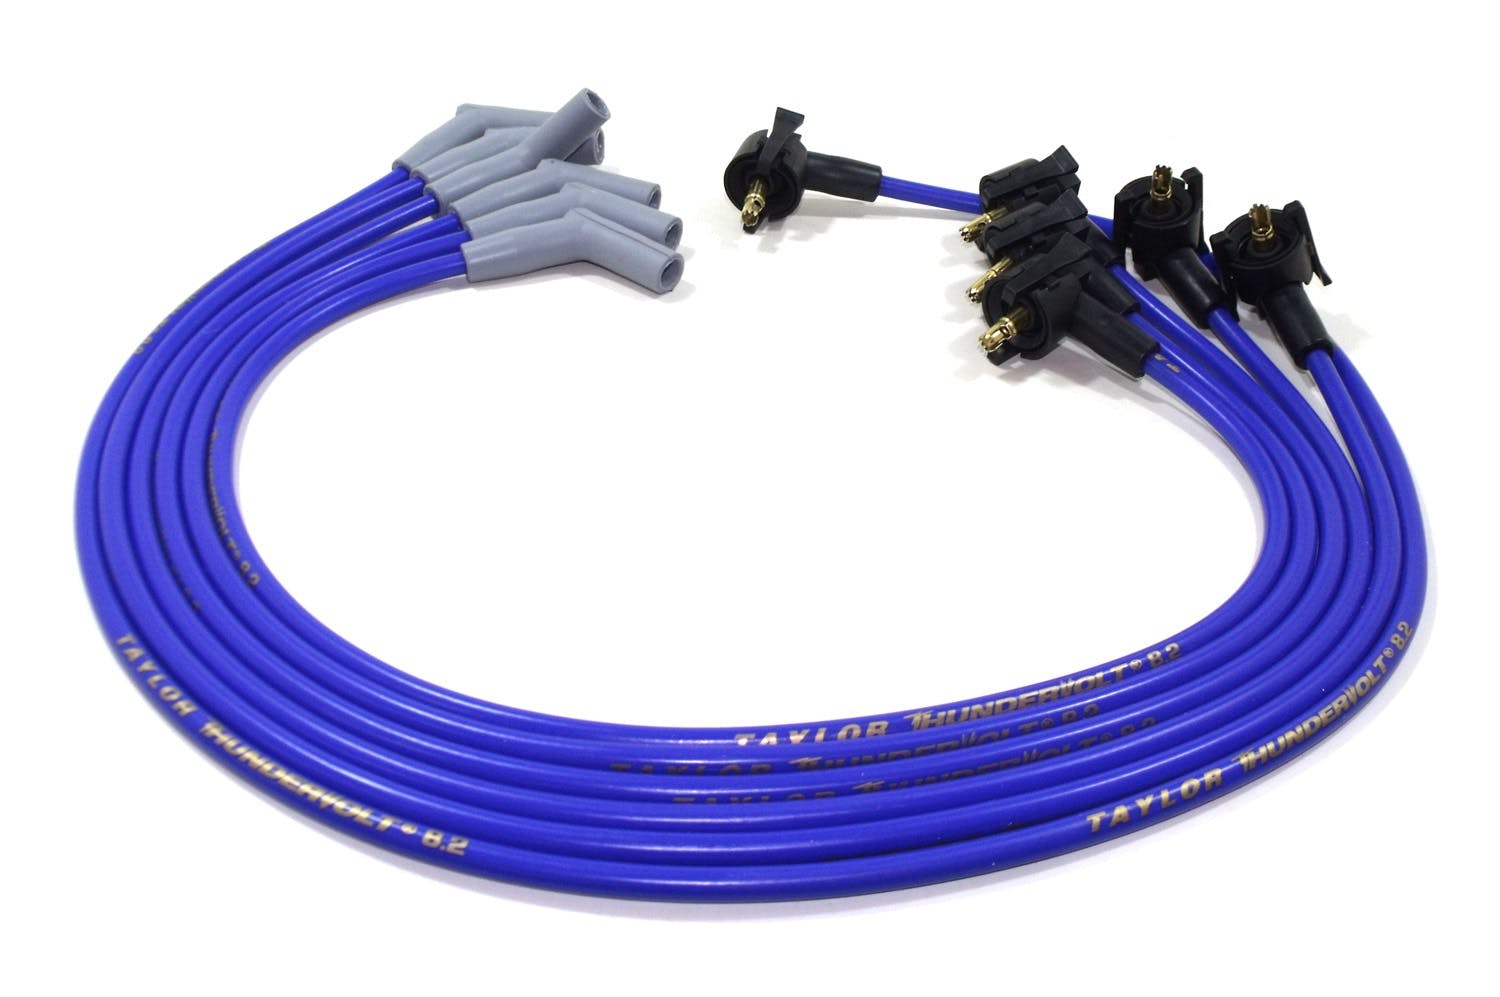 Taylor Cable Products 84696 Thundervolt 8.2 custom 6 cyl blue